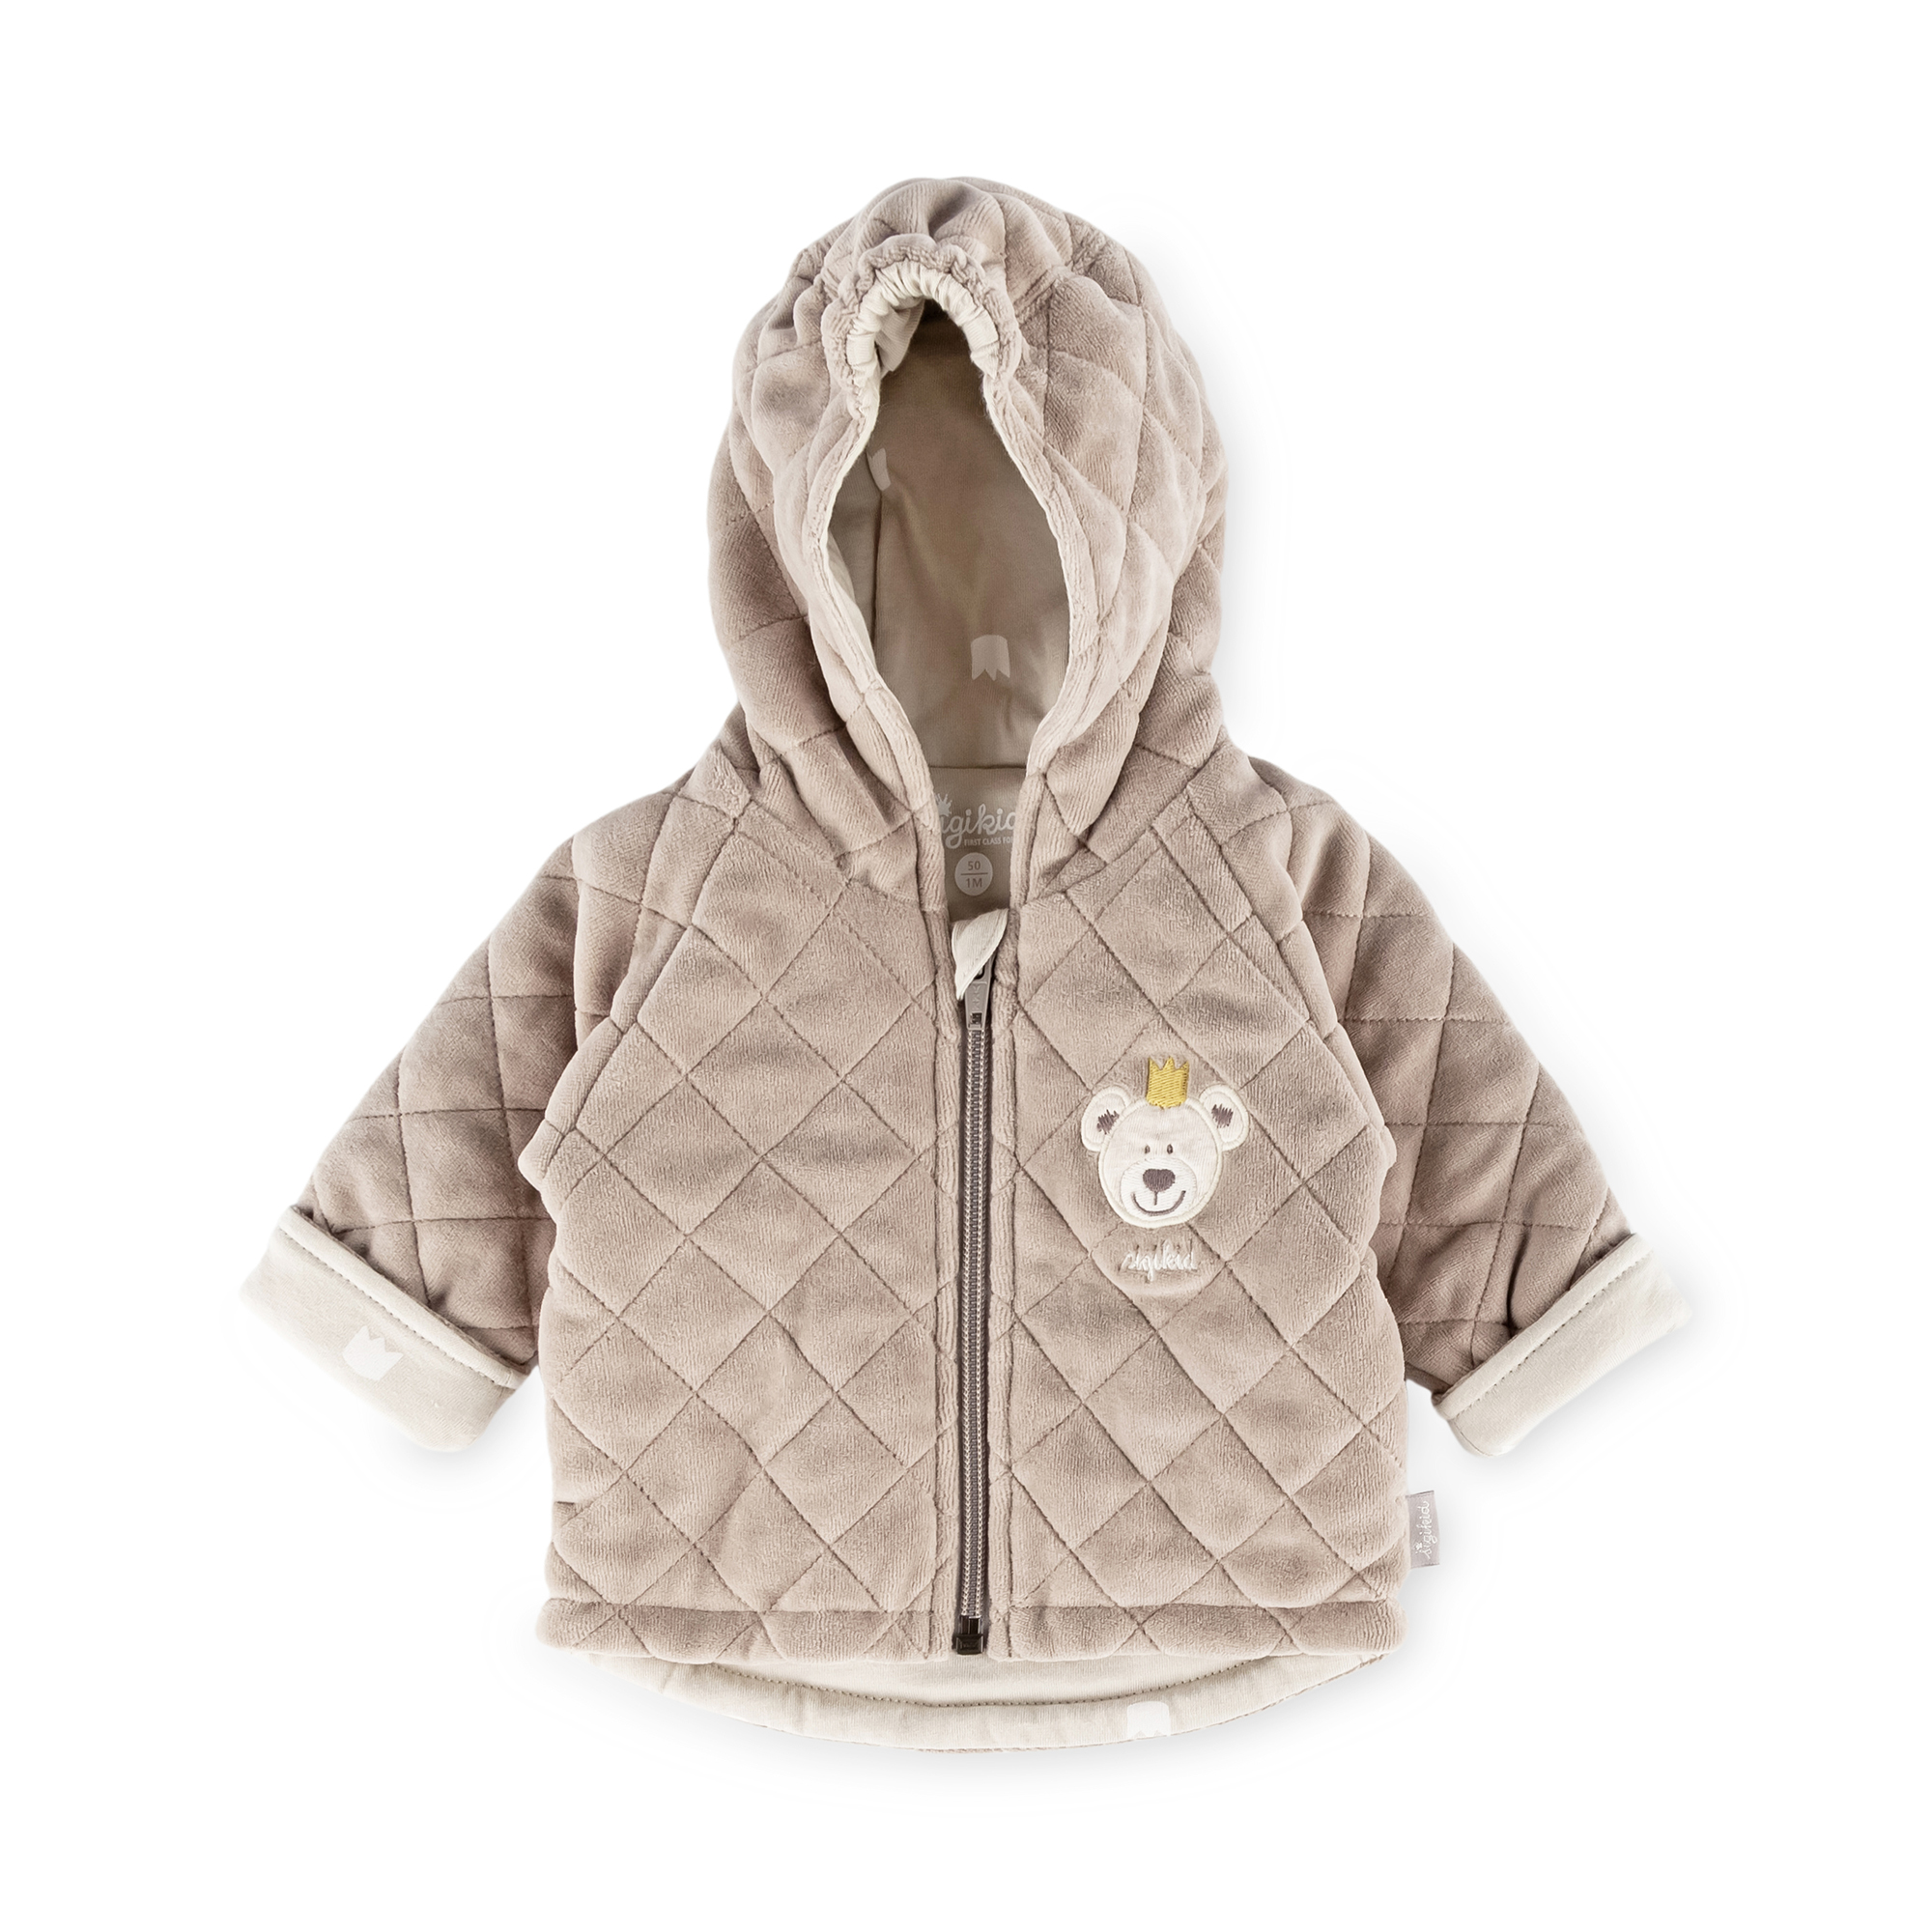 Newborn baby hooded velour jacket bear prince, quilted, beige